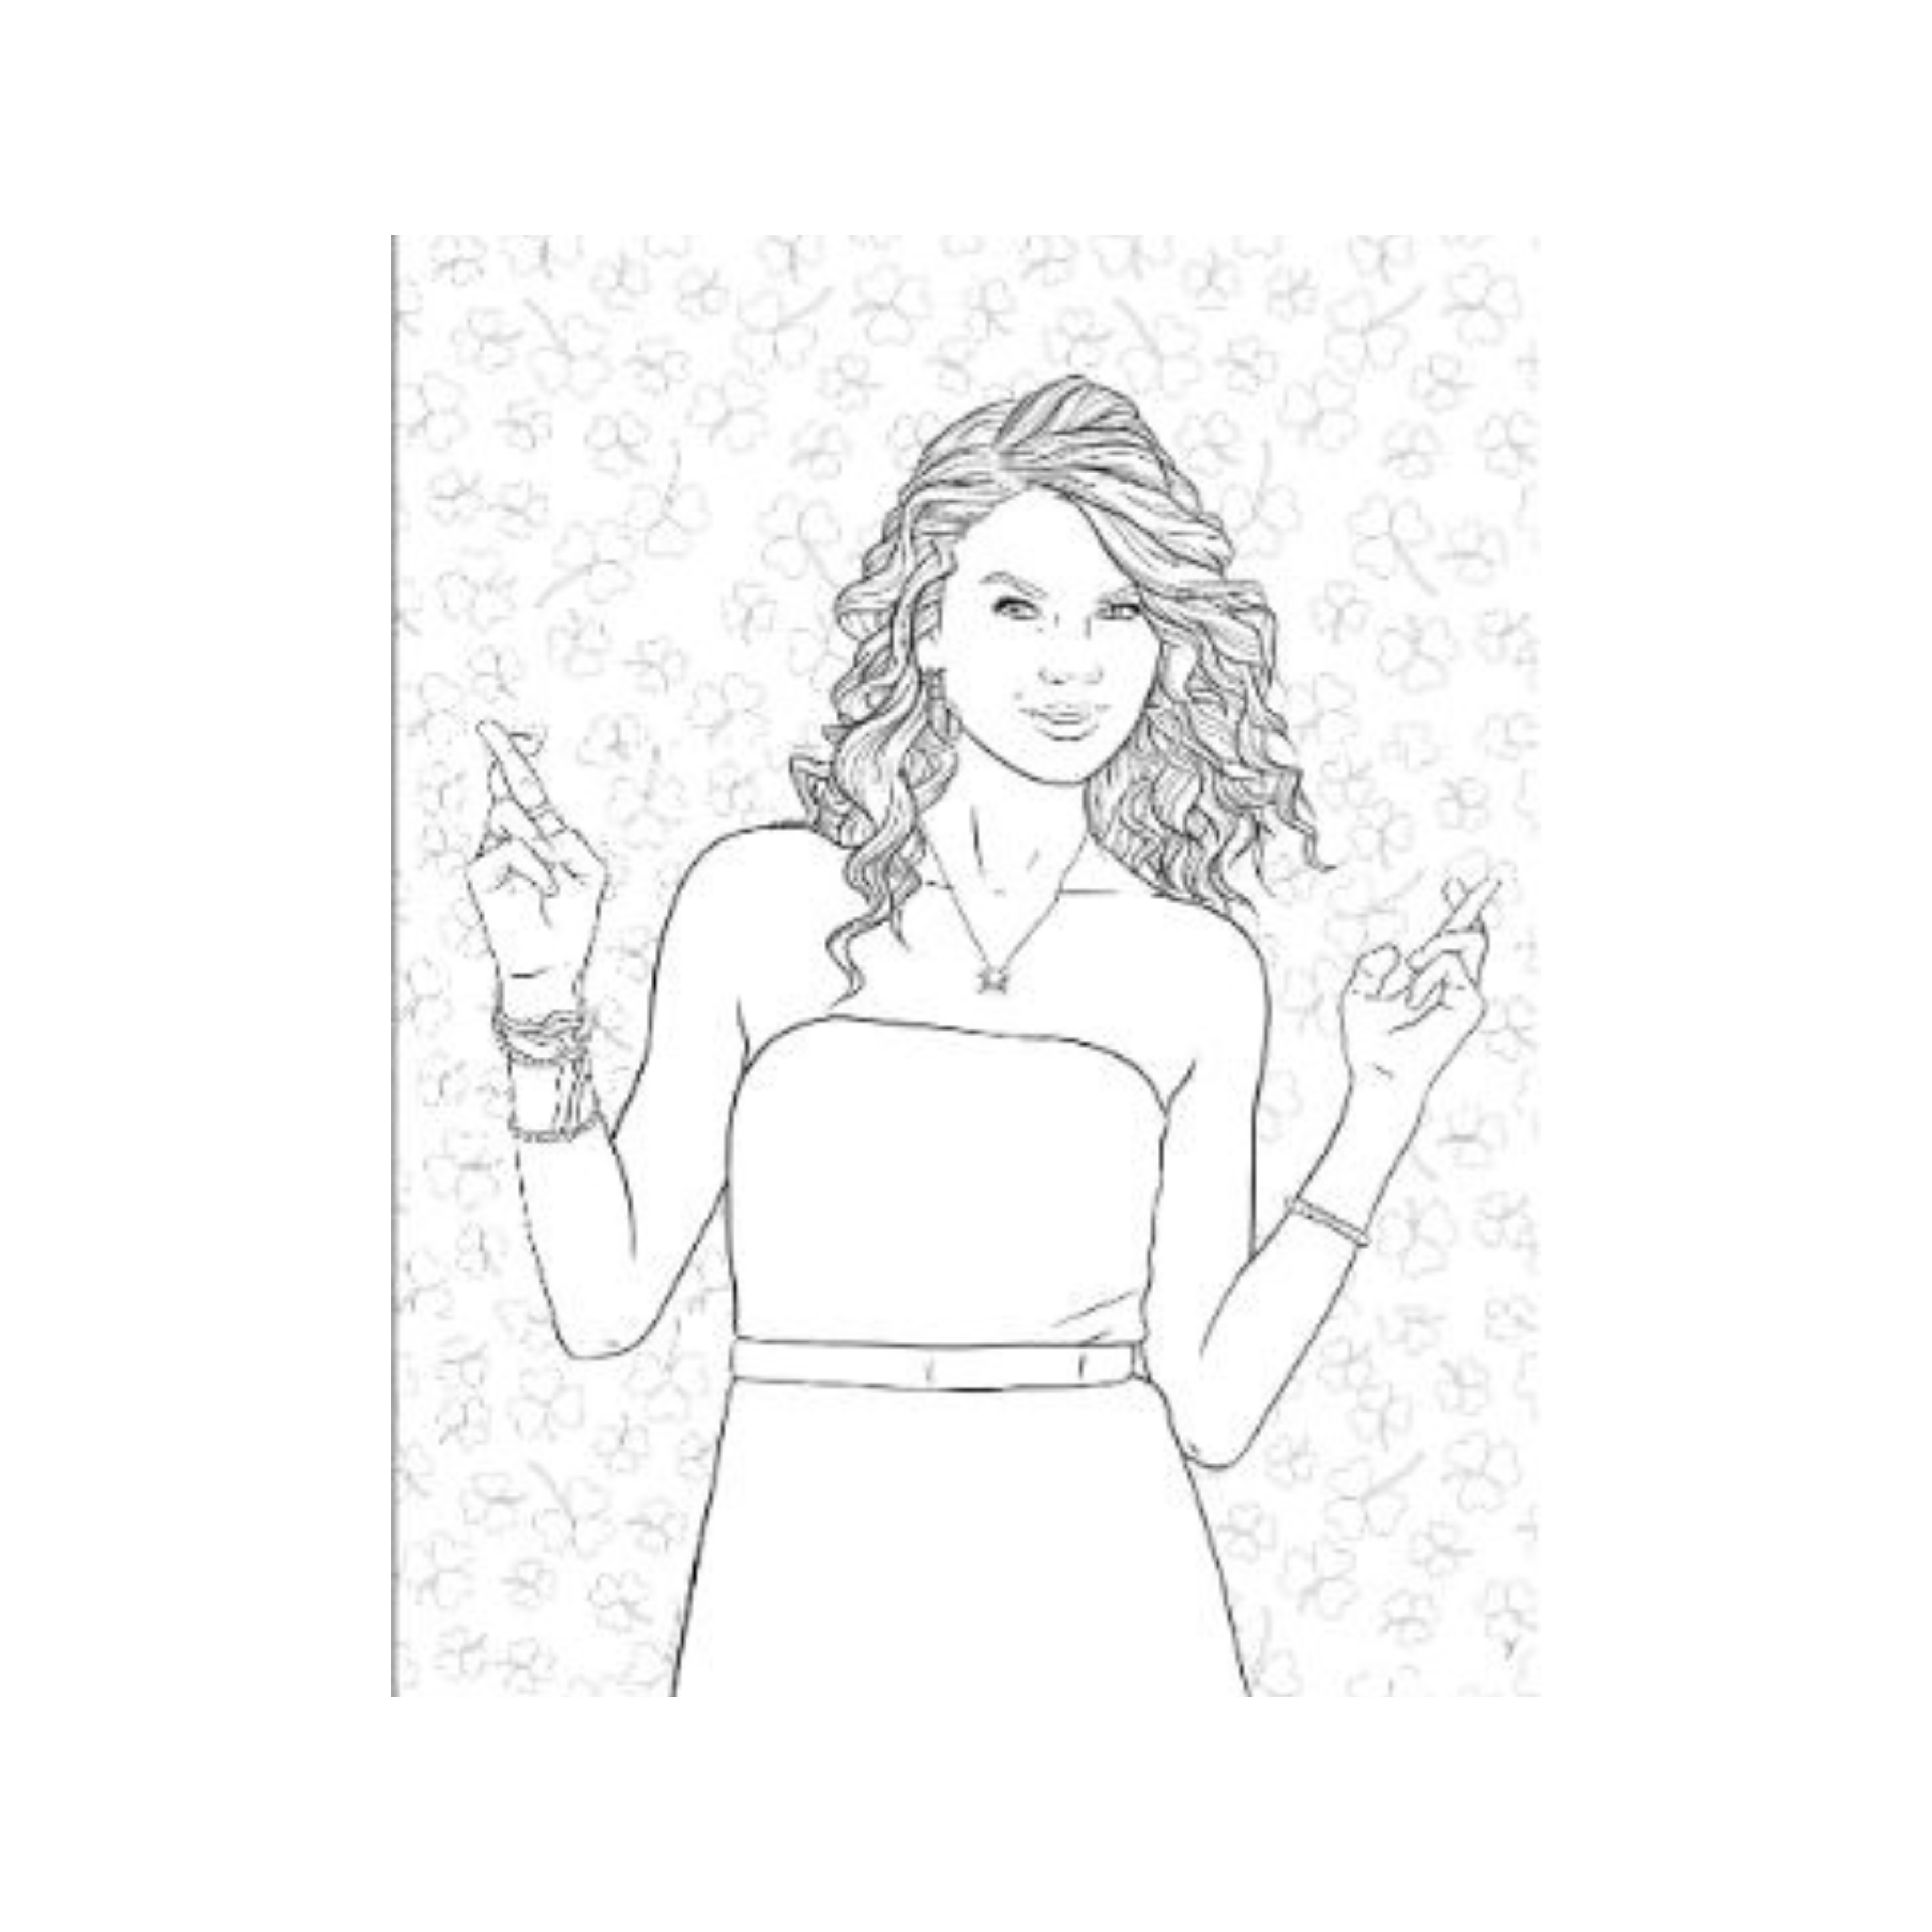 Taylor Swift Colouring Pages, Taylor Swift Coloring Book, Taylor